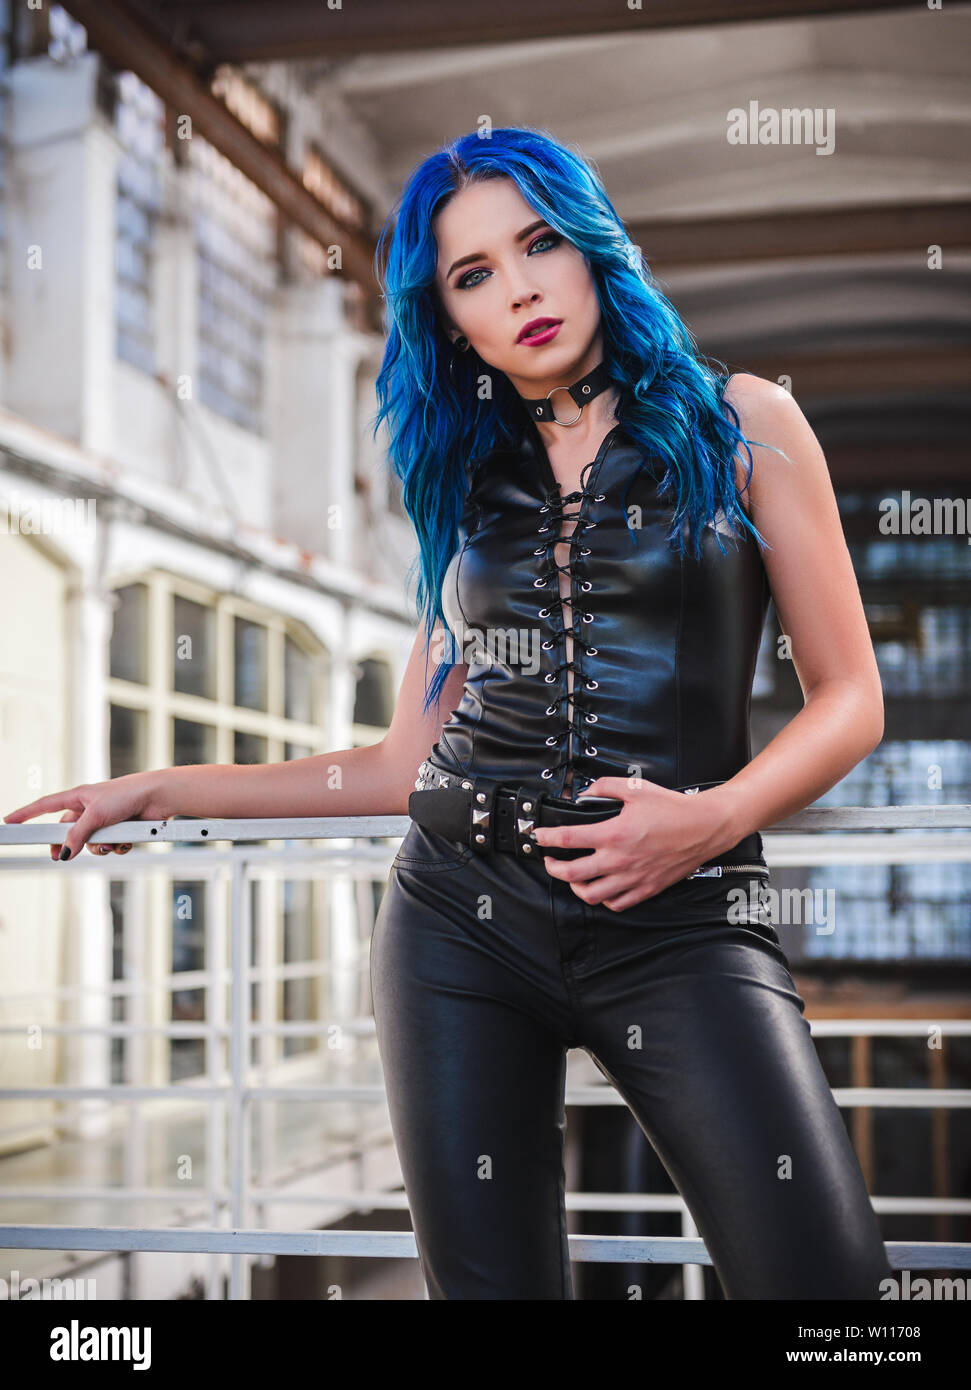 Cool rock  girl informal model  with blue hair dressed in 